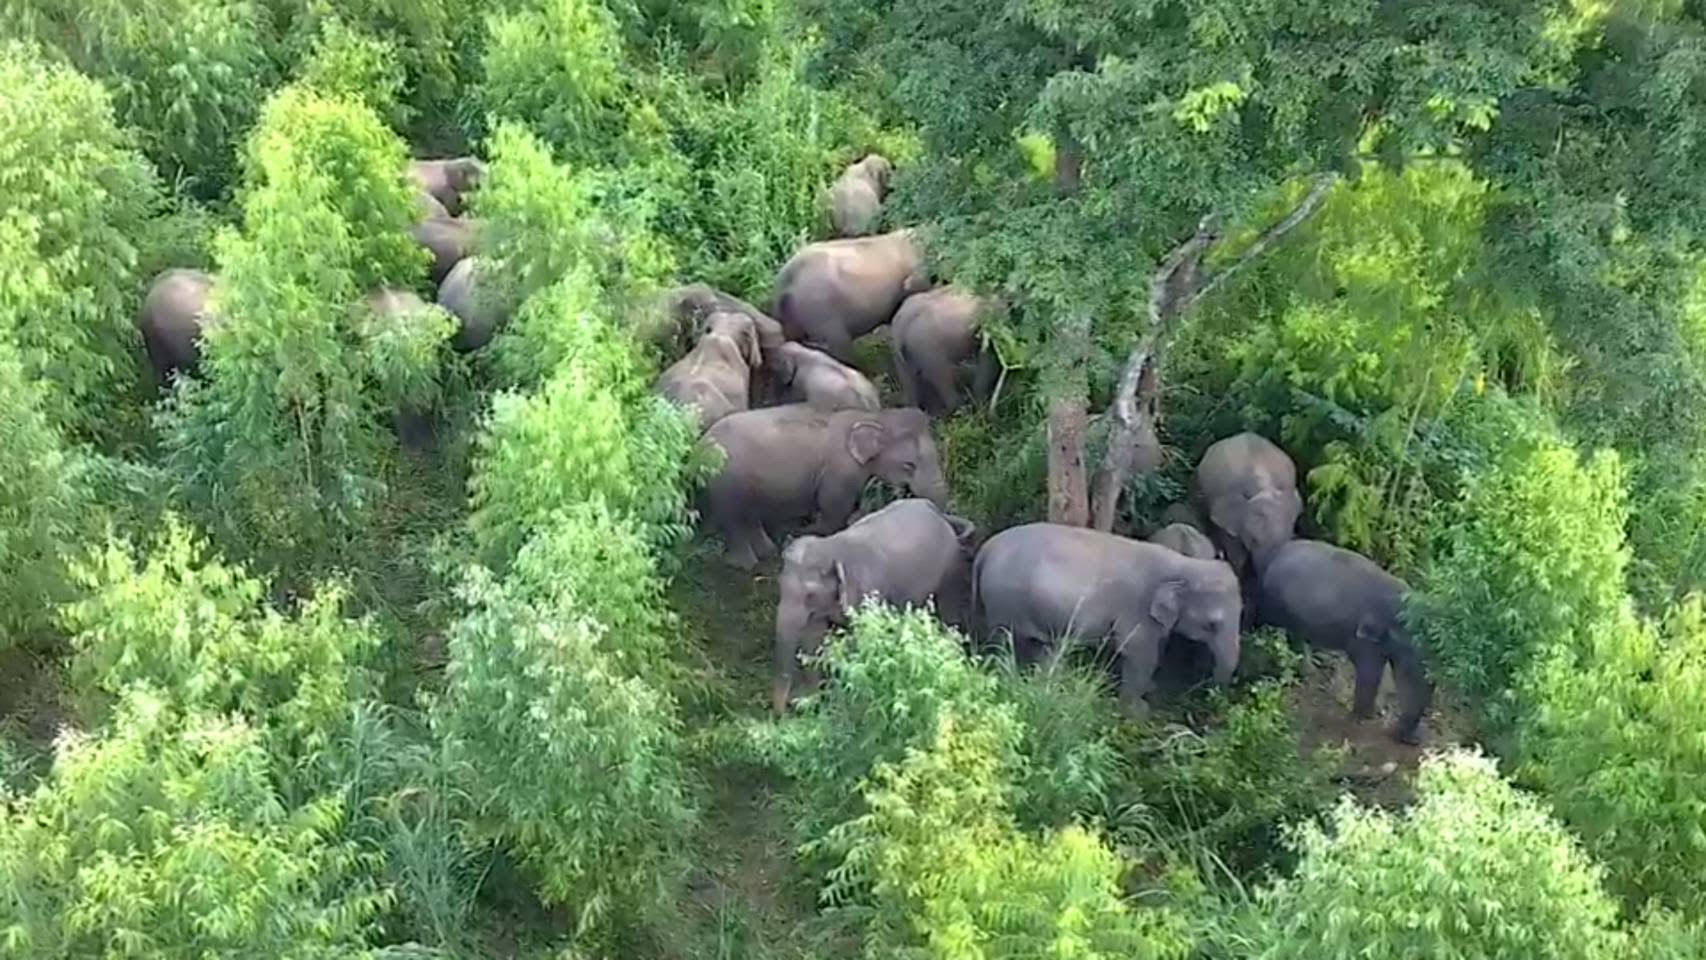 Wildlife Conservation Department considering “birth control” for rapidly growing wild elephant population in Chonburi and other Eastern provinces